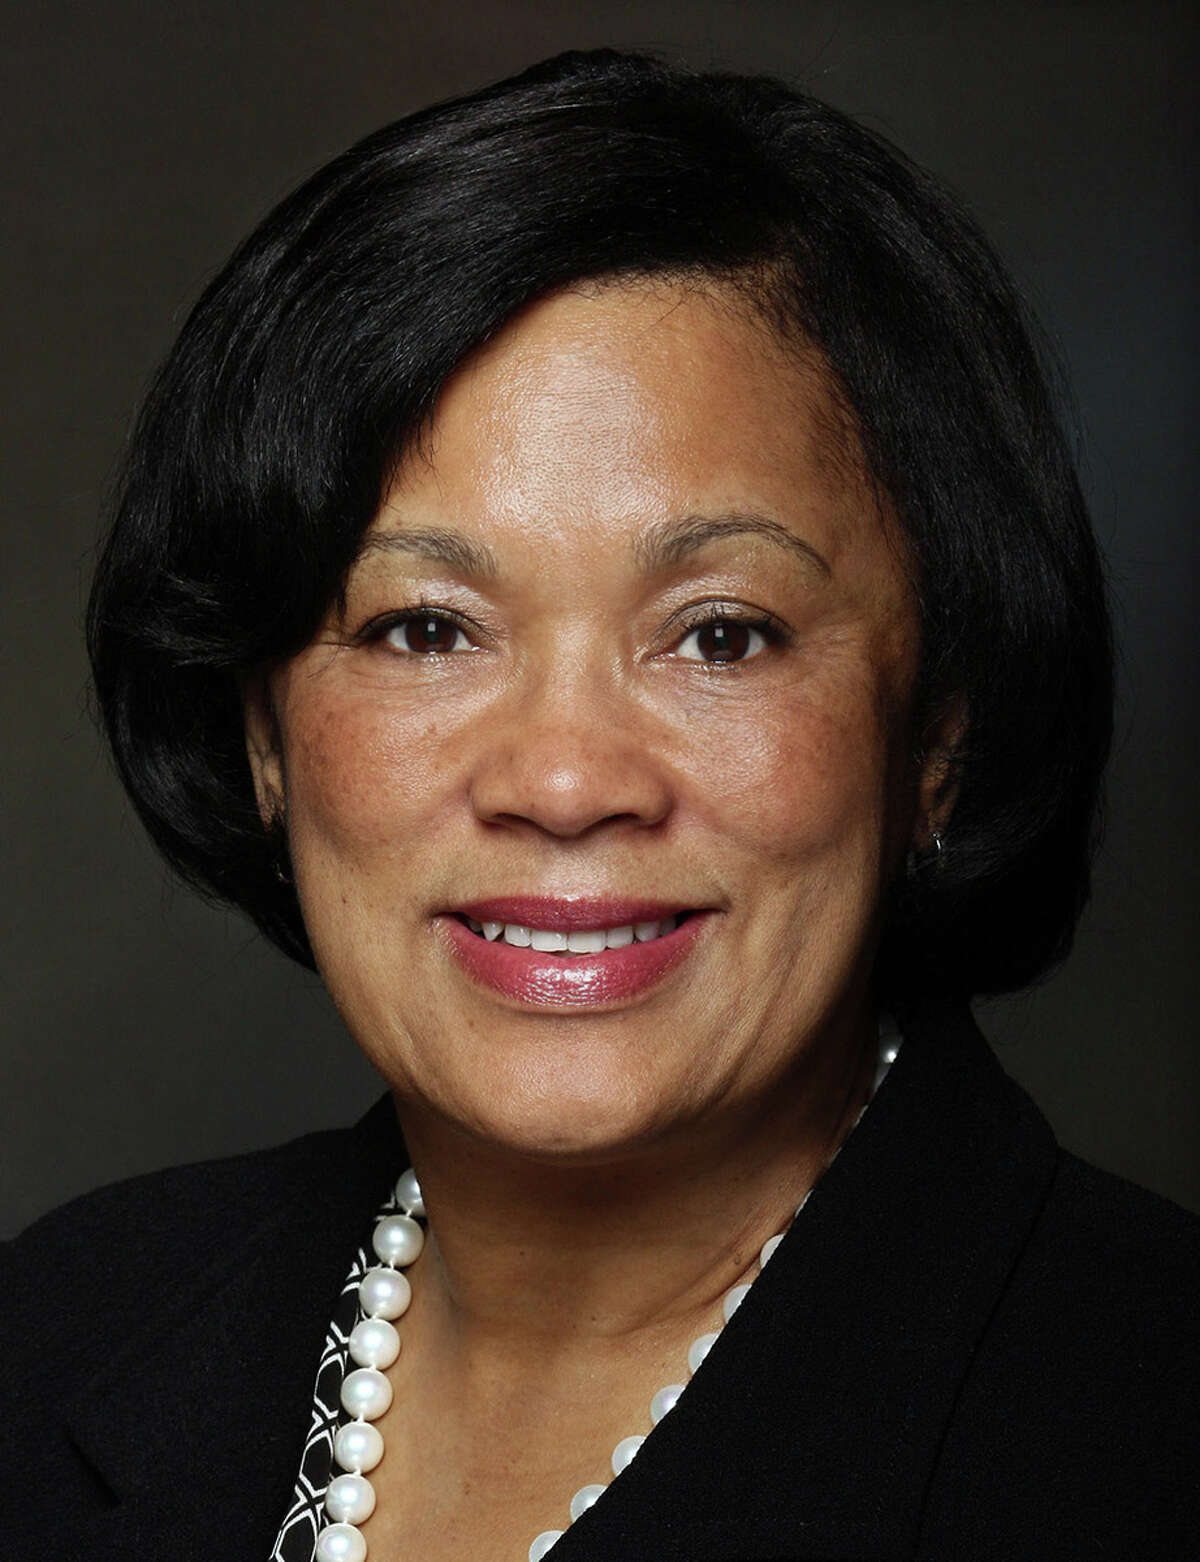 Democratic State Sen. Toni Harp is the newly elected Mayor of New Haven.